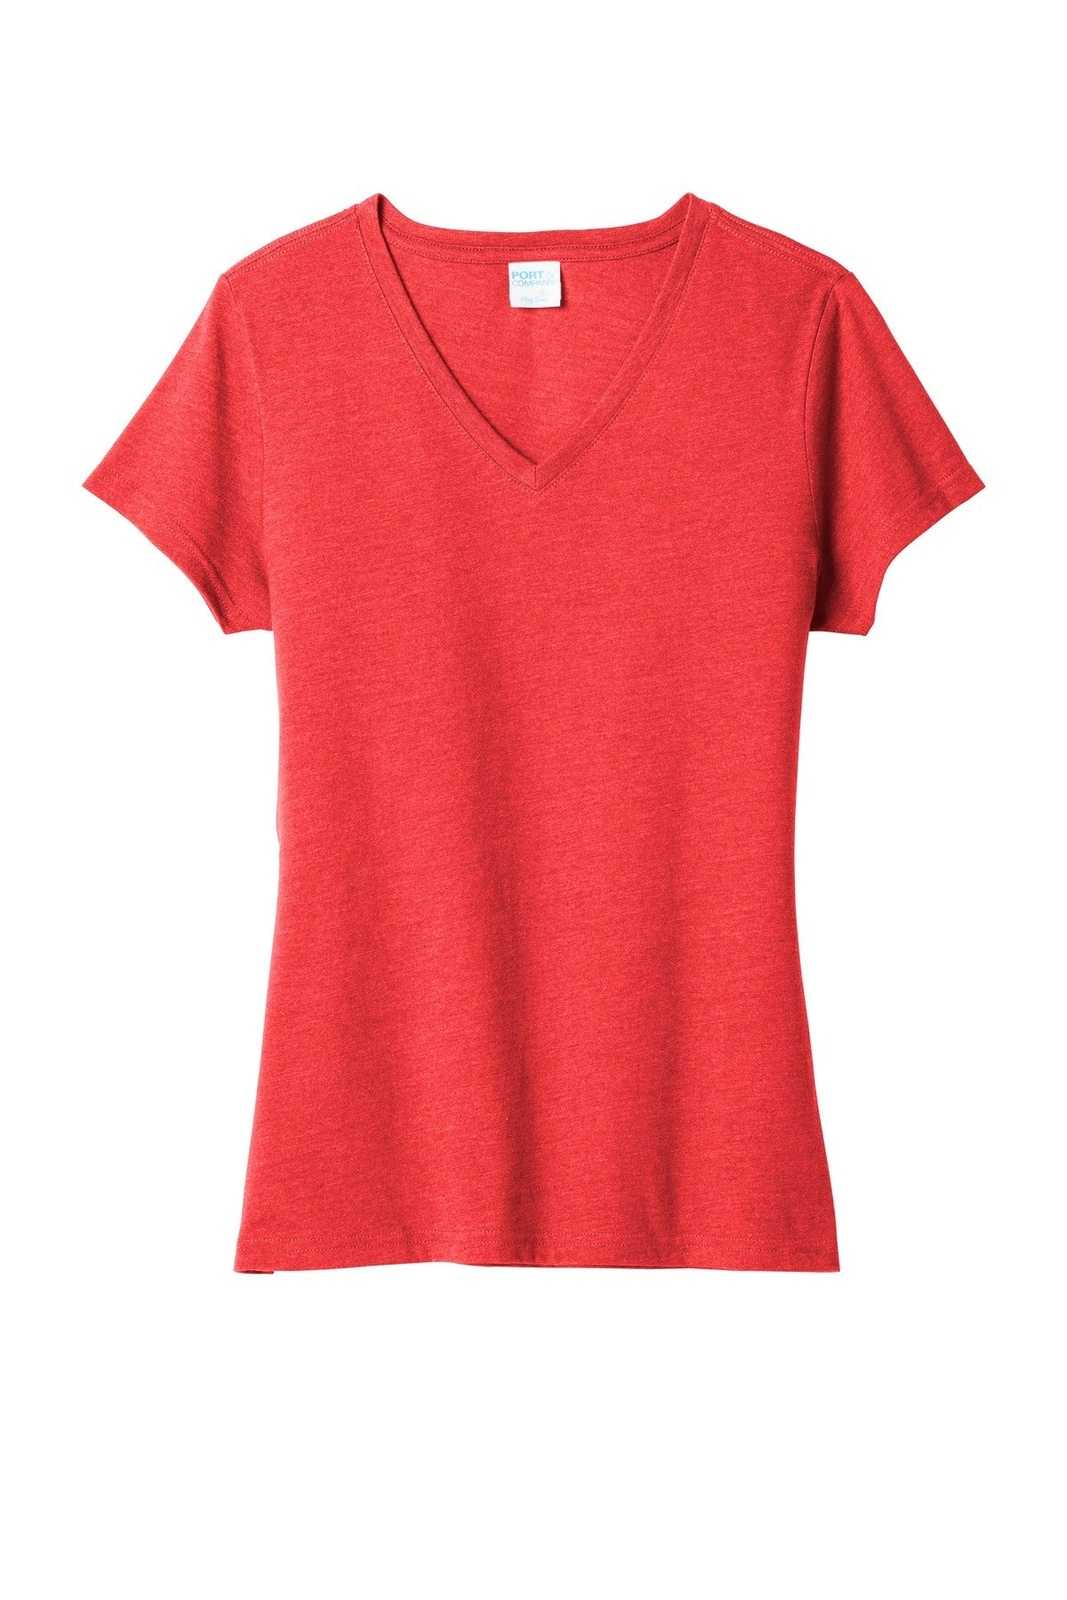 Port &amp; Company LPC455V Ladies Fan Favorite Blend V-Neck Tee - Bright Red Heather - HIT a Double - 5